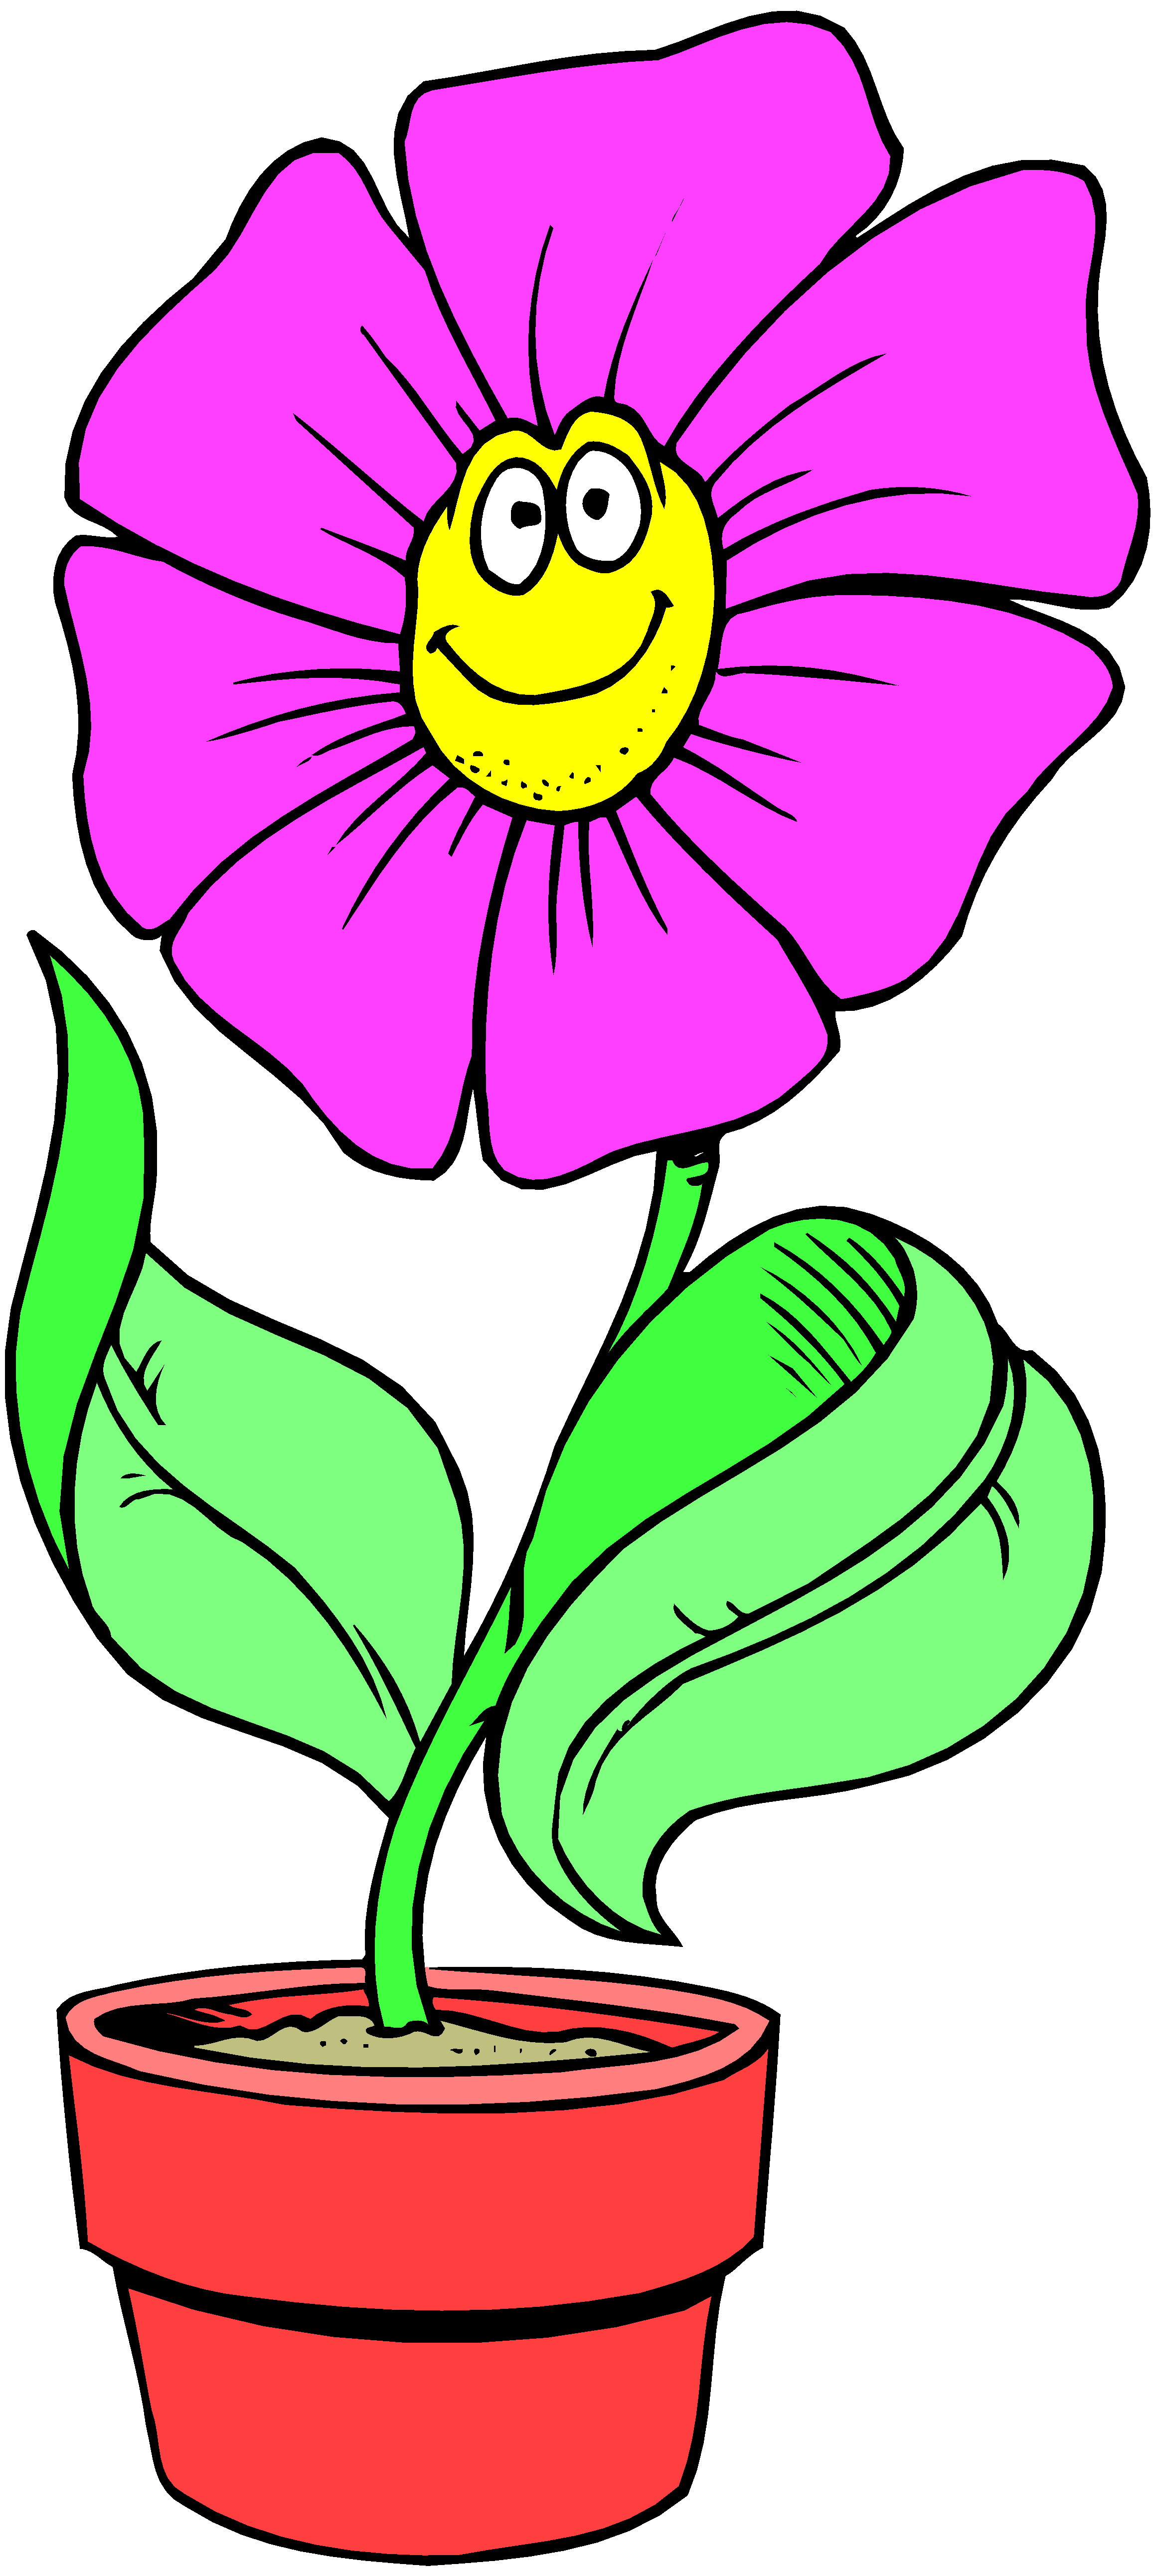 free animated clip art of flowers - photo #42